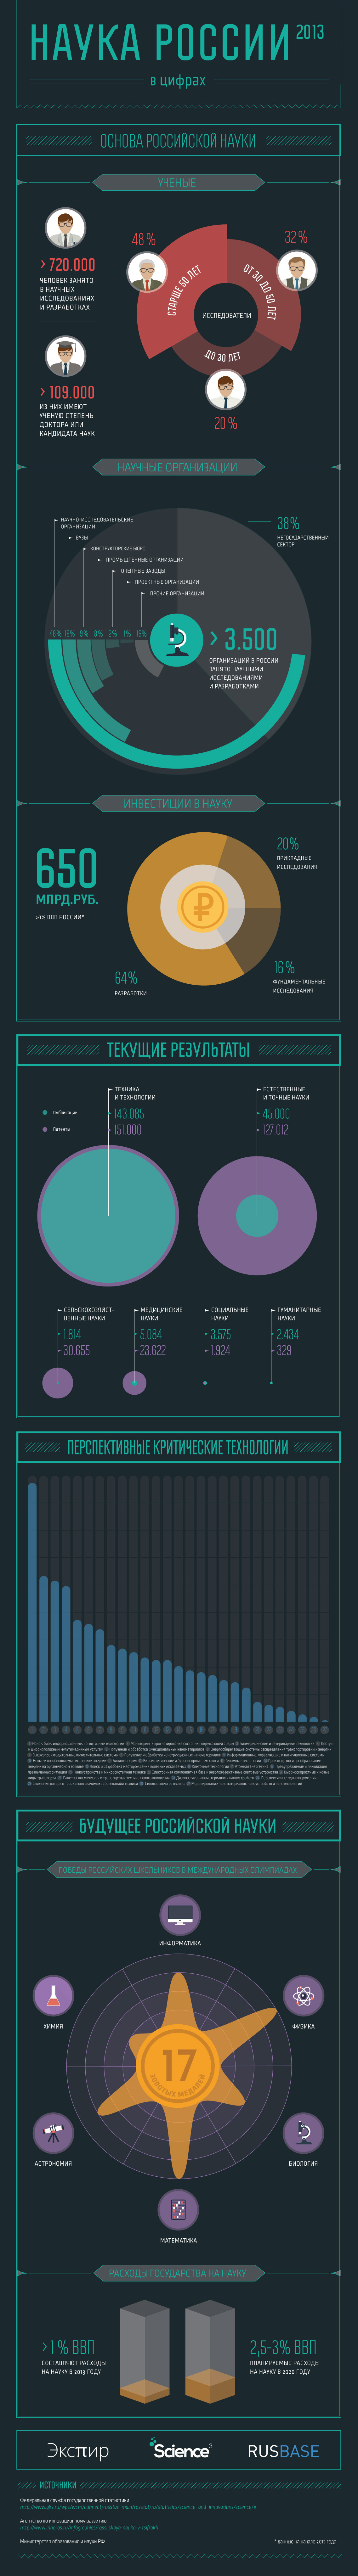 infographic Russia russian science Icon